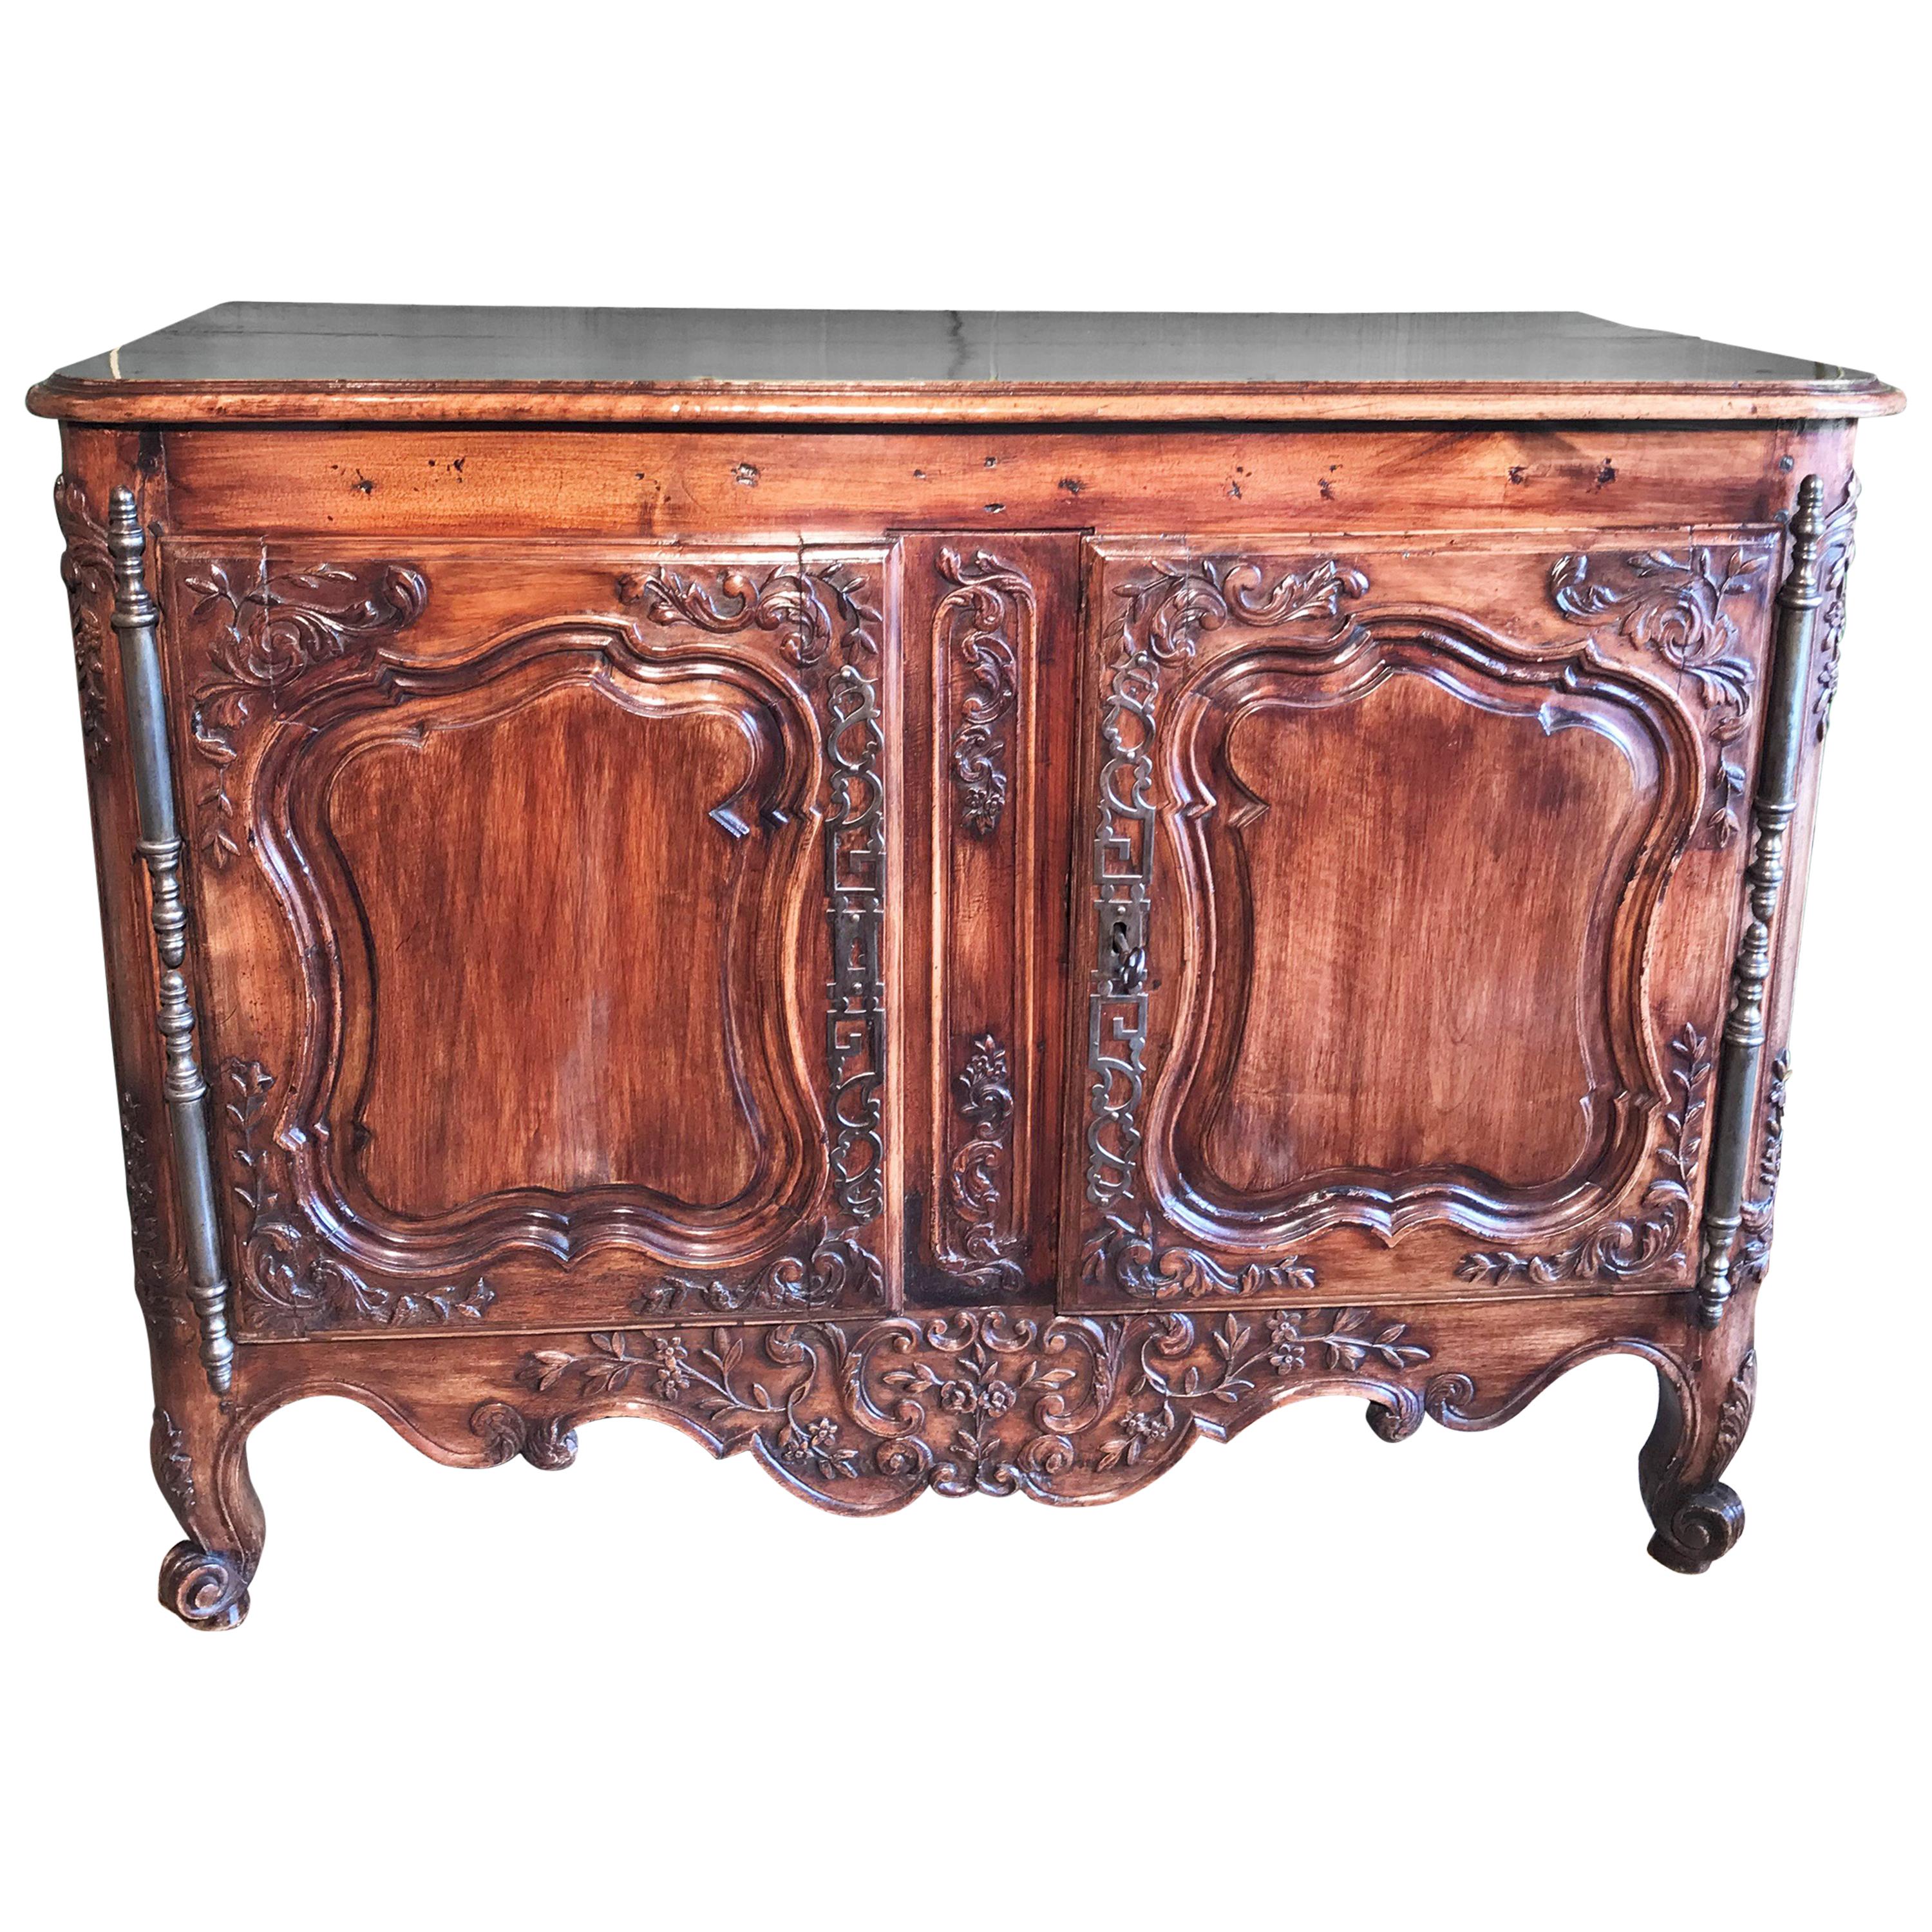 18th C. French Provencal Arlesienne Credence in Walnut Antiques Los Angeles CA For Sale